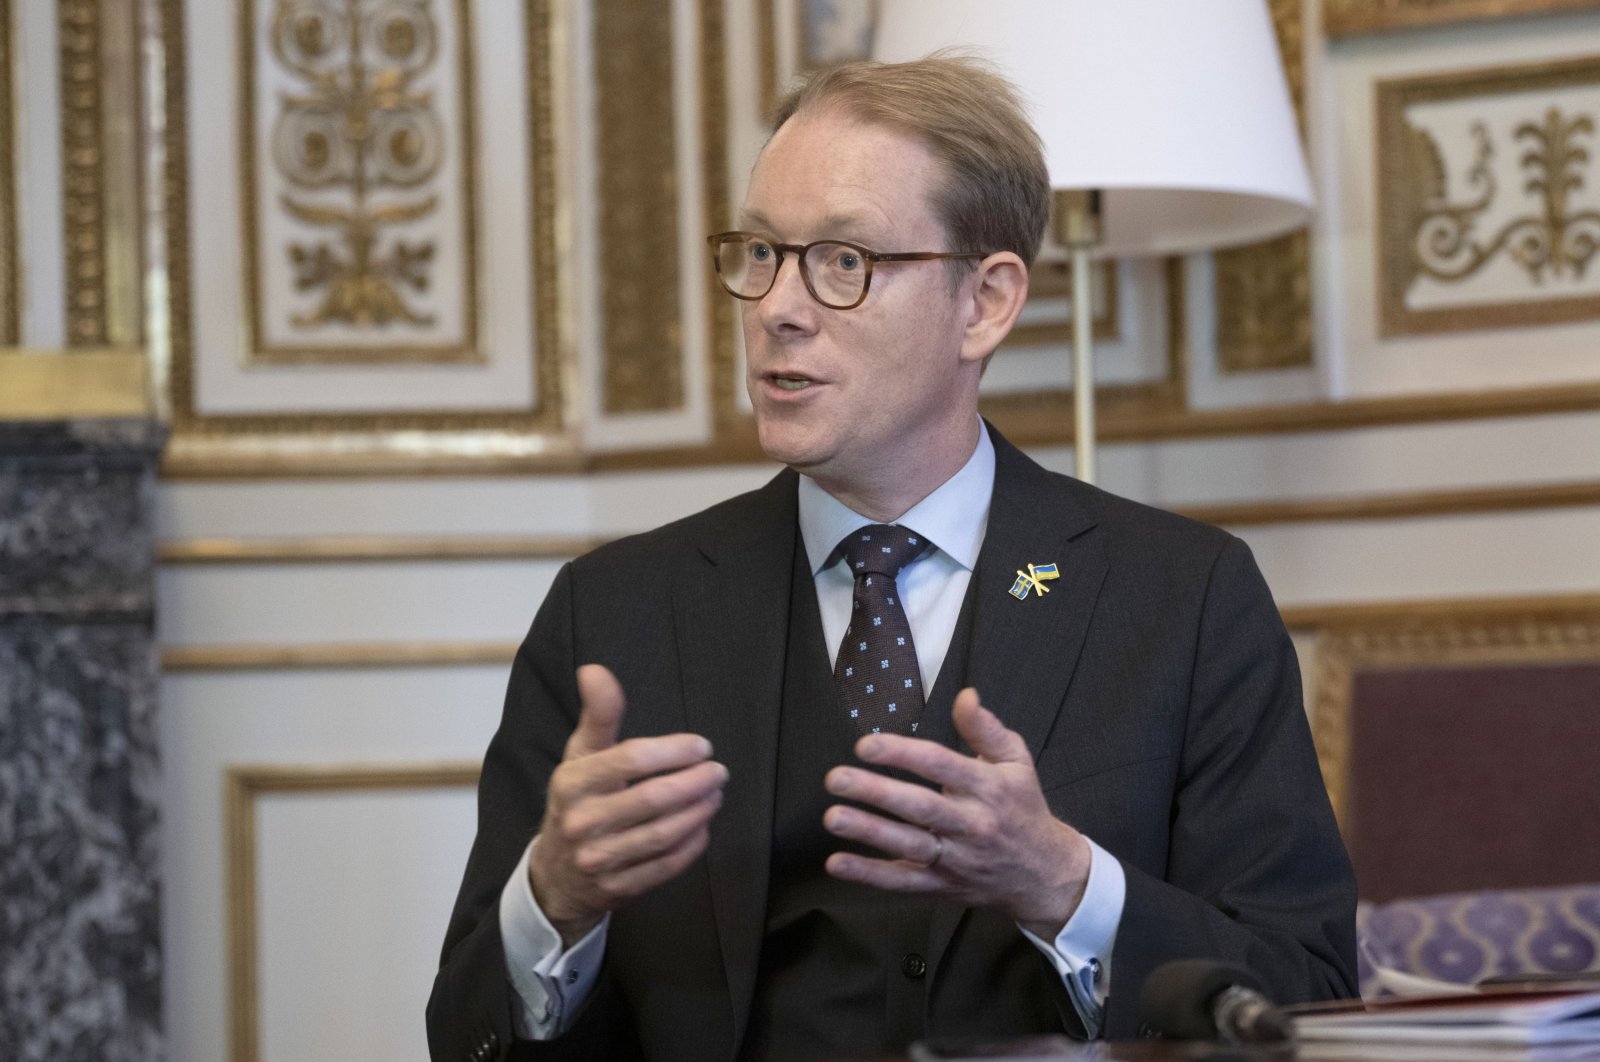 Swedish Foreign Minister Tobias Billstrom speaks during an interview with the Associated Press at the Ministry of Foreign Affairs in Stockholm, Sweden, Monday, Oct. 24, 2022. (AP Photo)